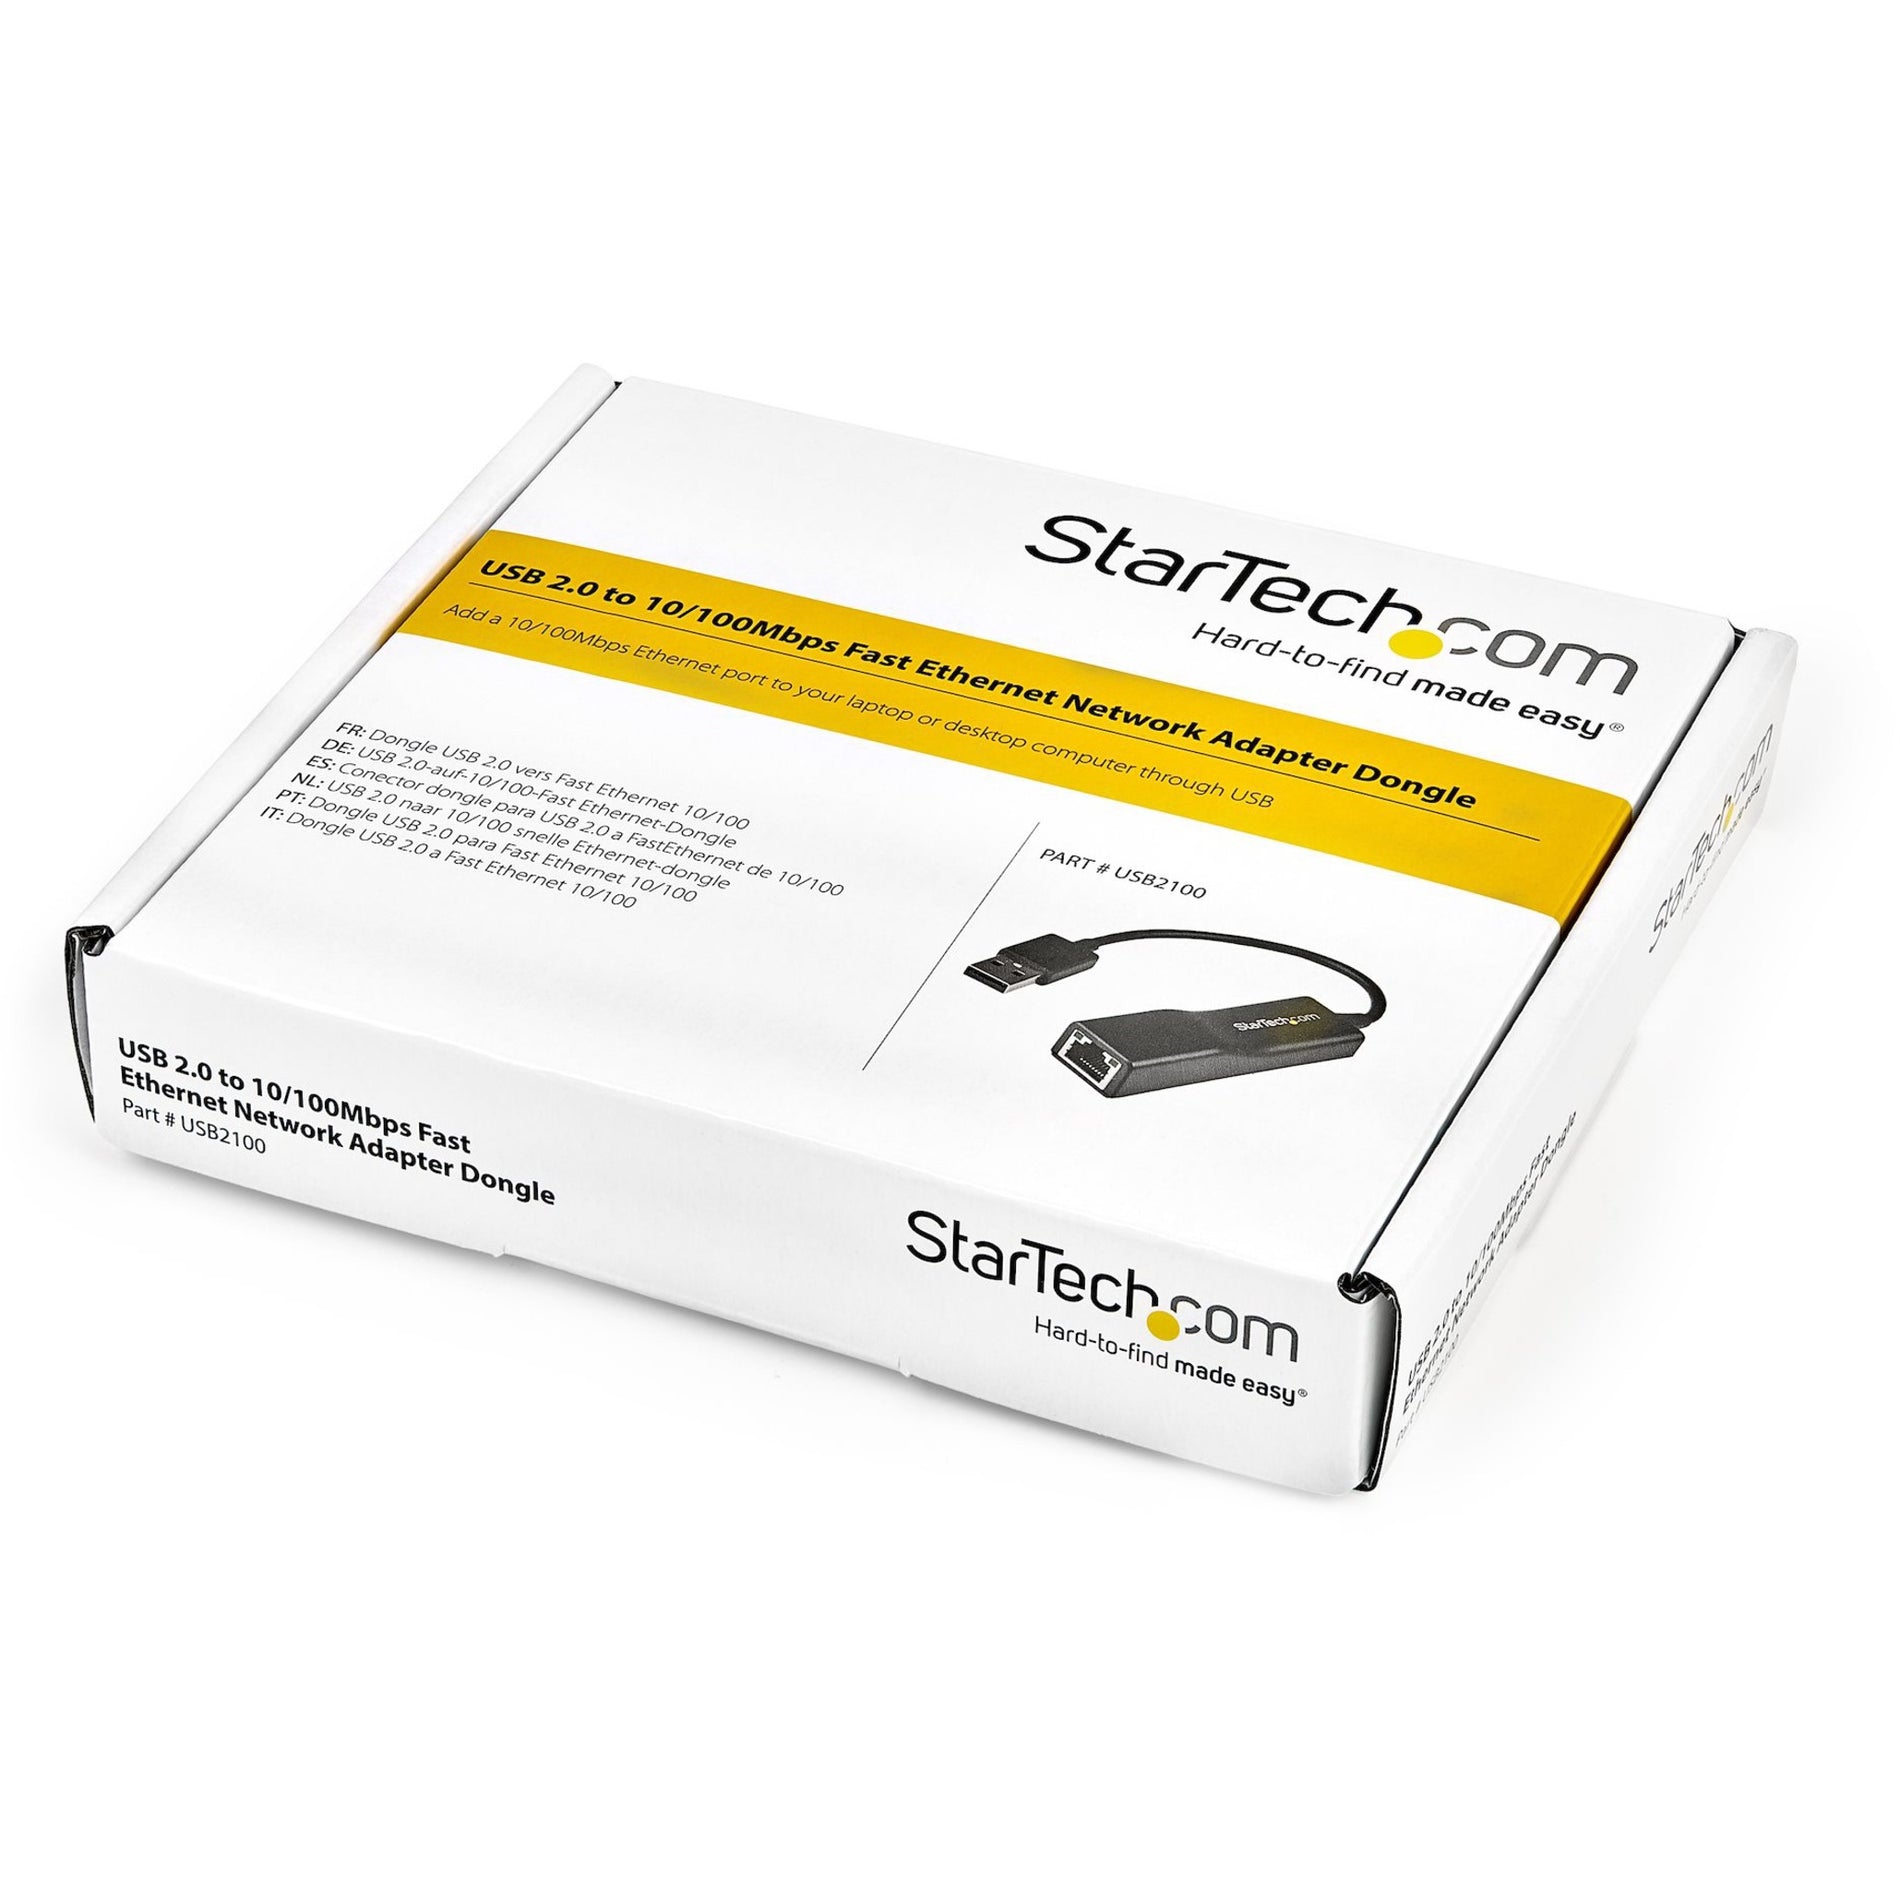 StarTech.com USB2100 USB 2.0 to 10/100 Mbps Ethernet Network Adapter Dongle, Easy Plug-and-Play Internet Connection